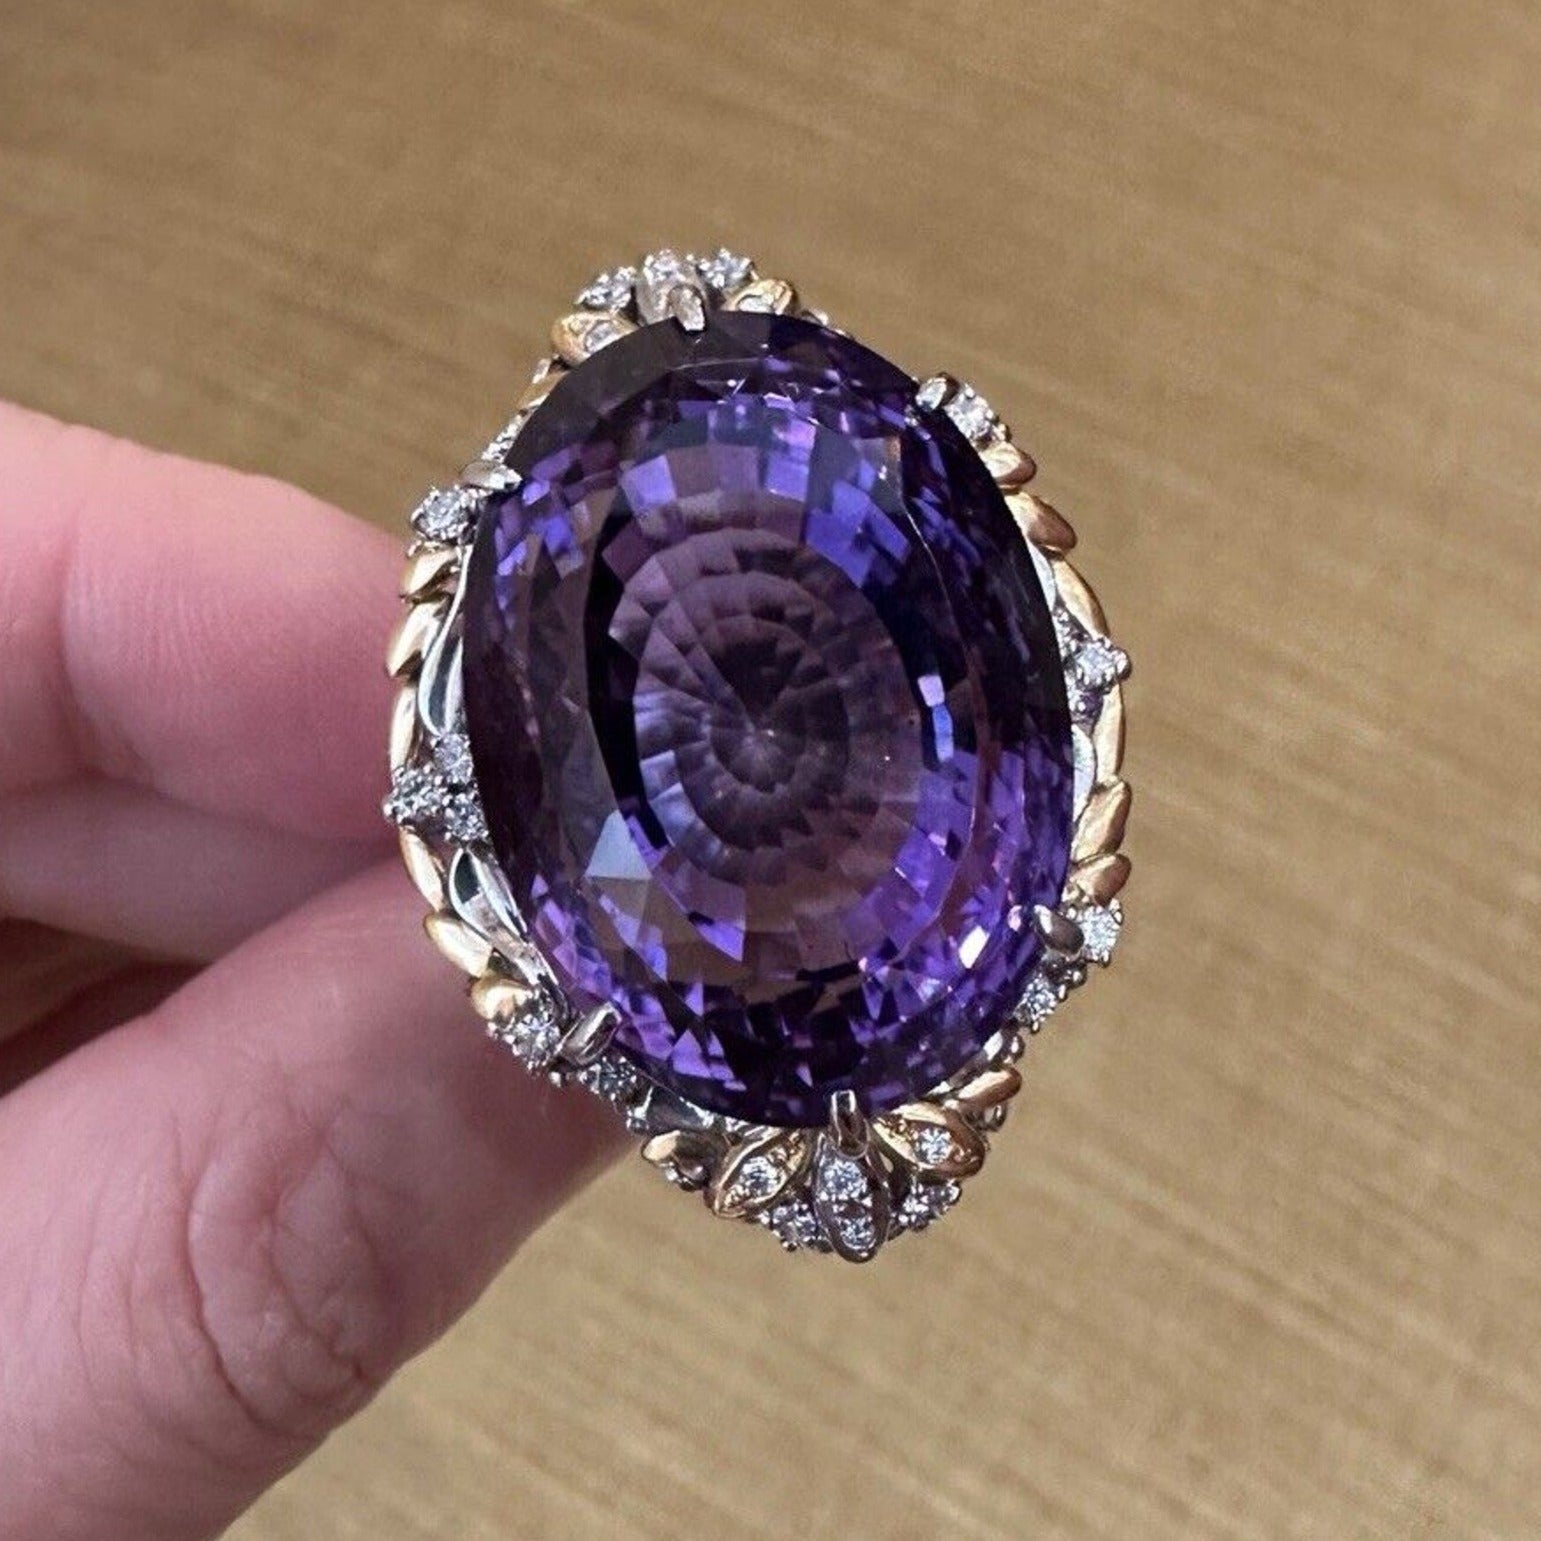 Large Oval Amethyst Ring 62.33 ct with Diamonds in Platinum and Gold